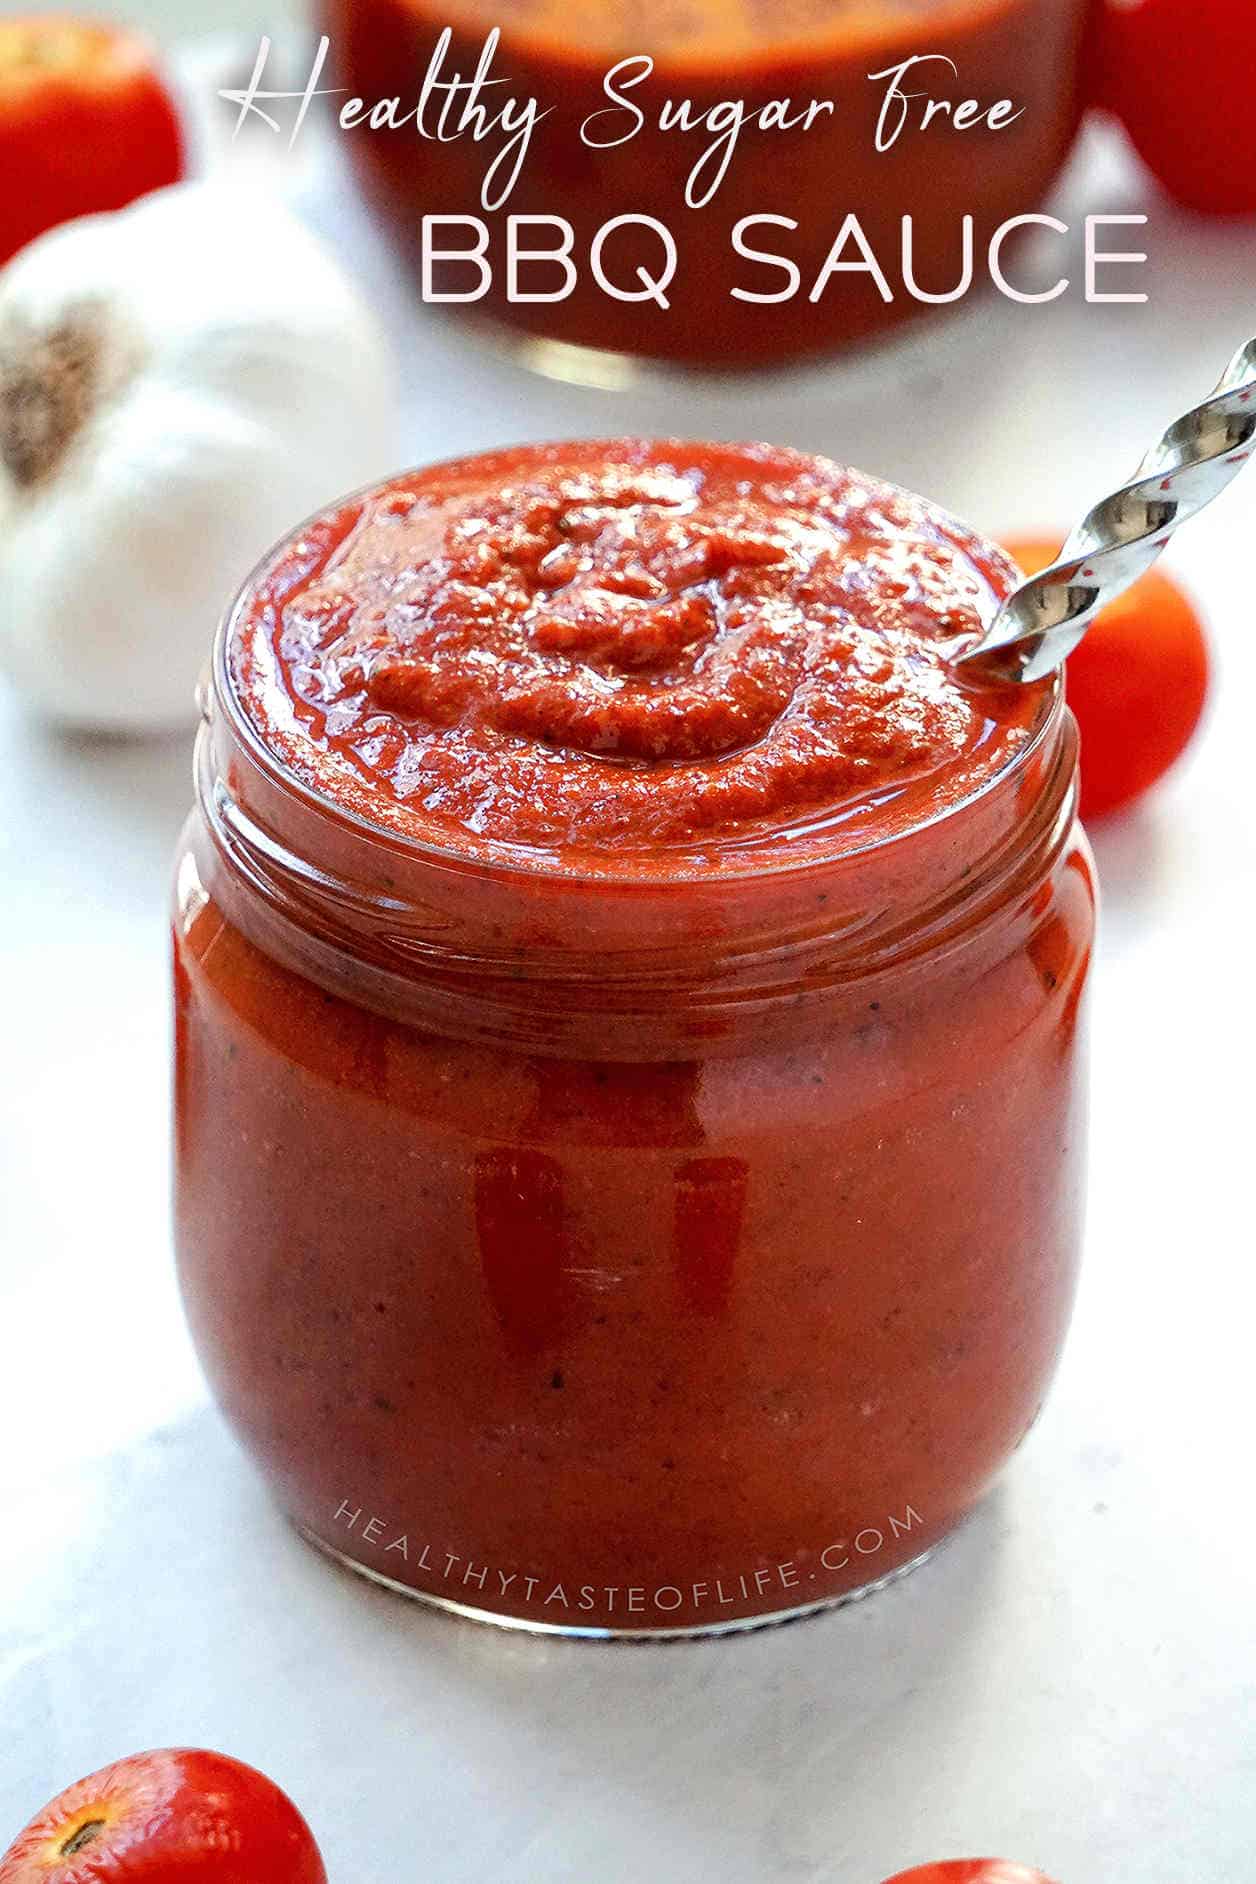 Learn how to make a healthy sugar free BBQ sauce from scratch at home. This healthy BBQ sauce recipe is made without ketchup, its sugar free, gluten free and dairy free. A healthy keto, paleo and whole30 BBQ sauce that is made with clean whole foods – low carb, vegan and kid friendly.